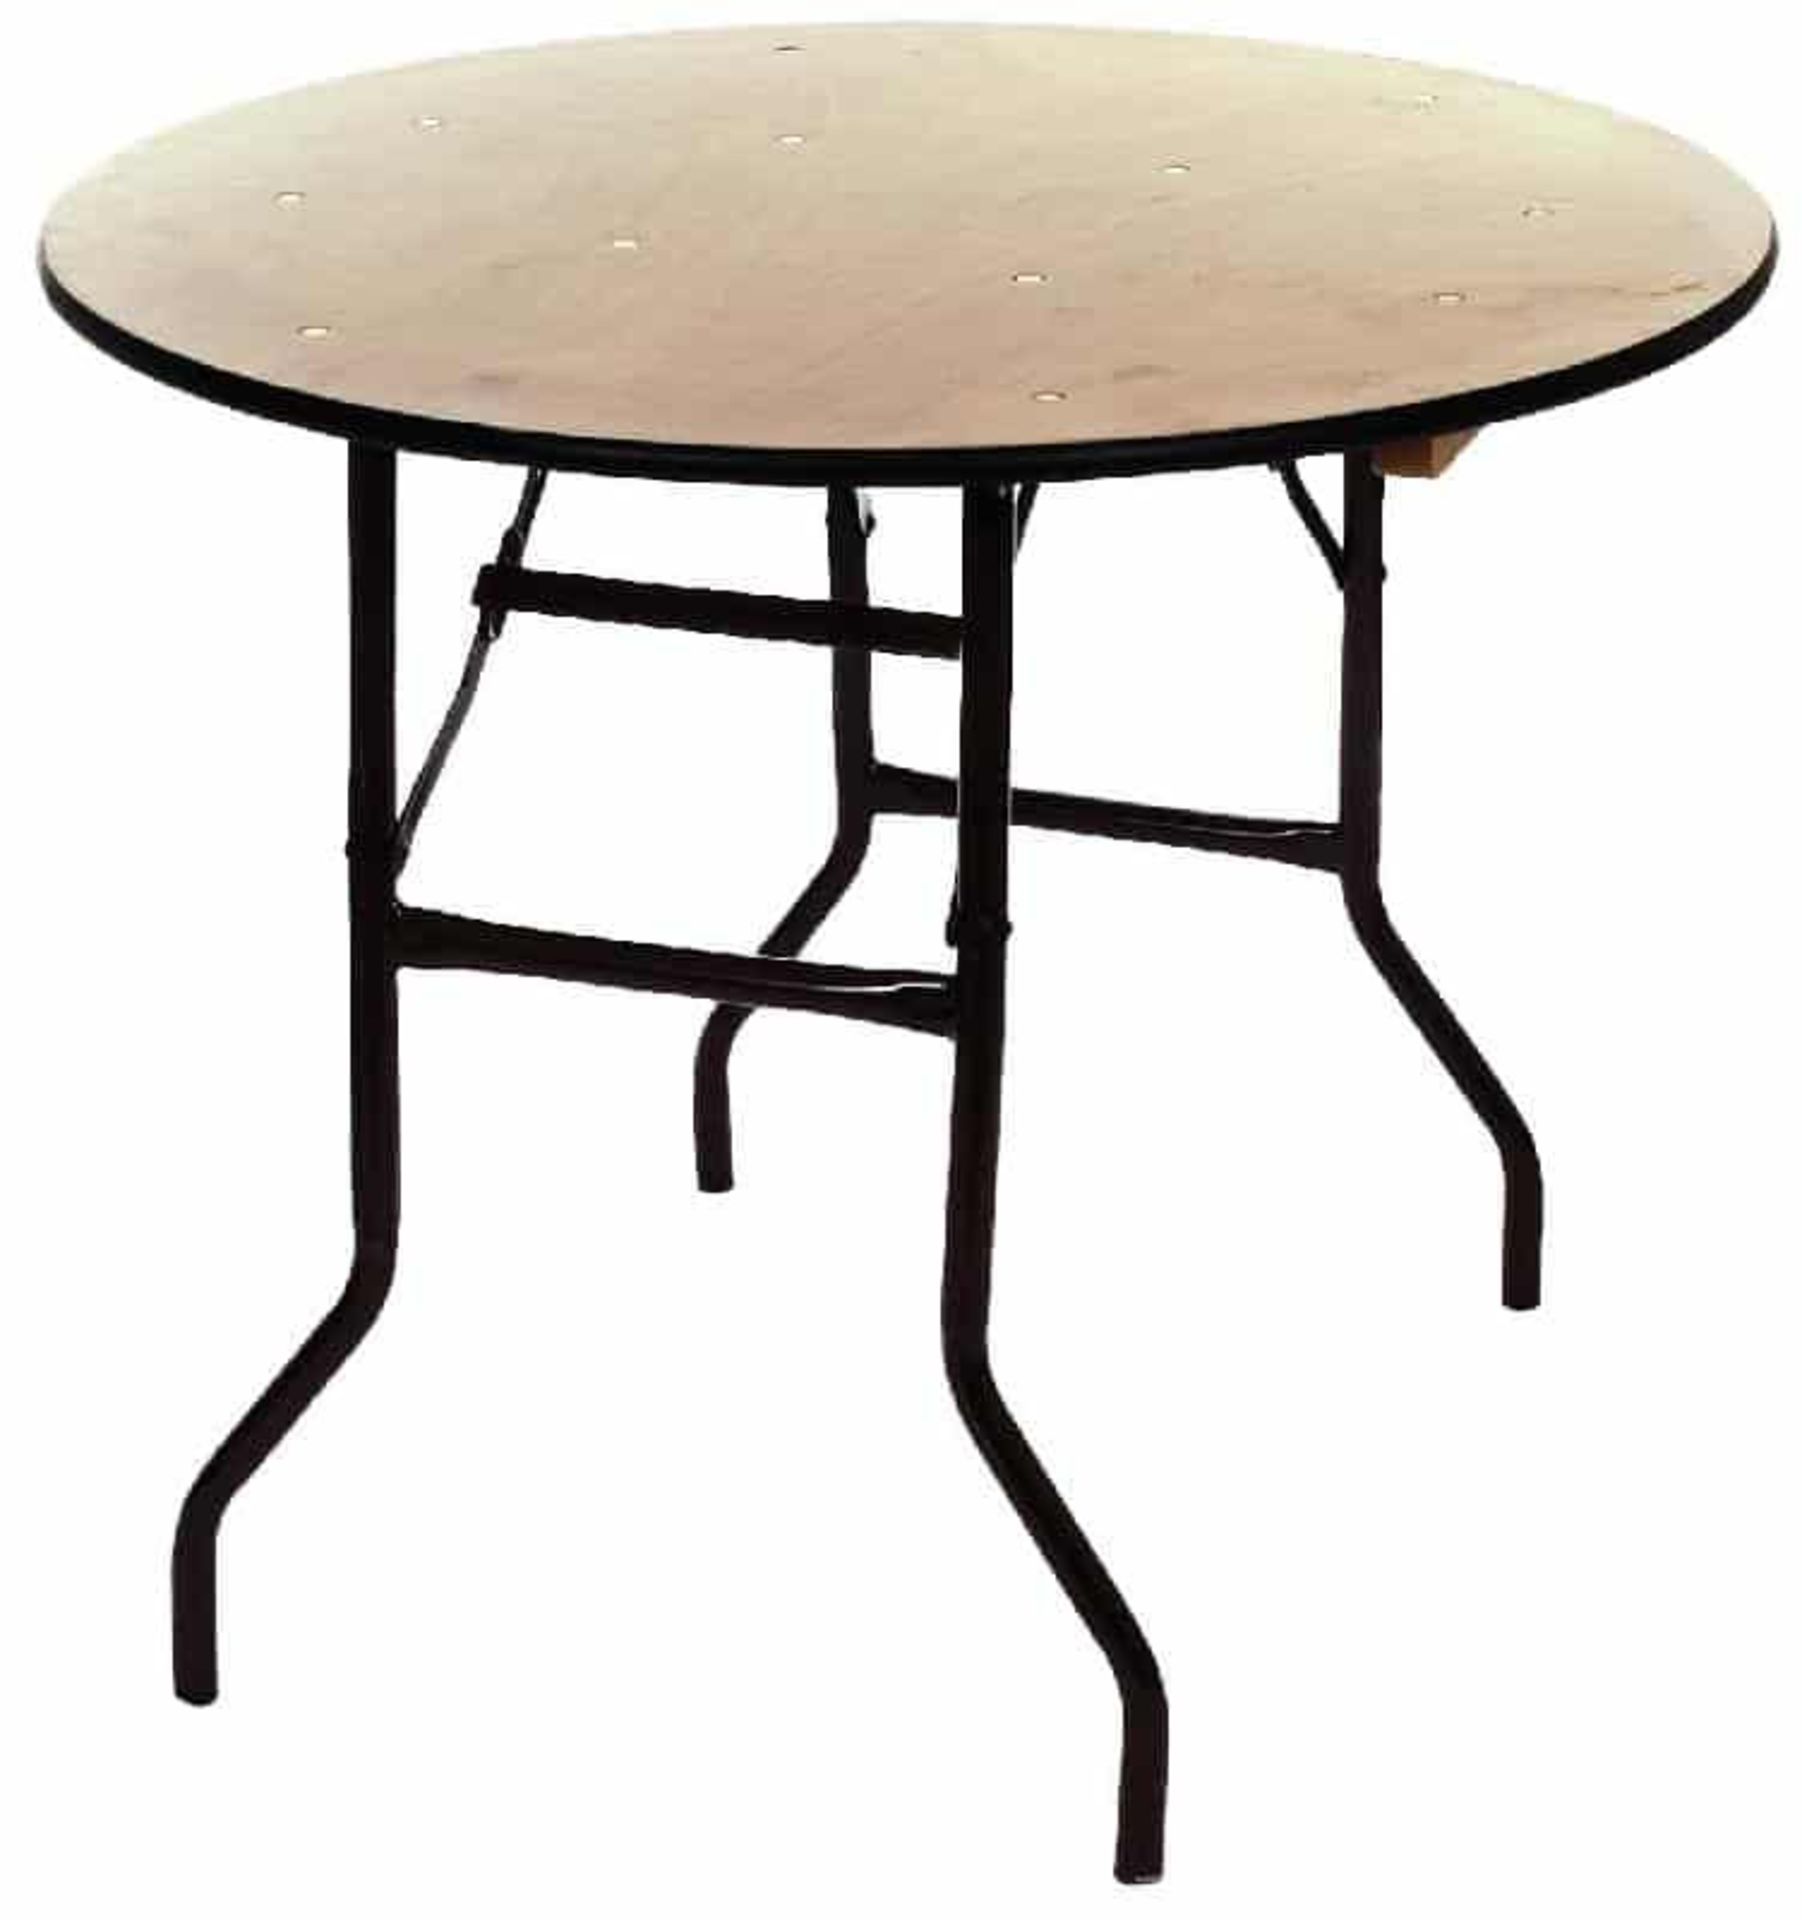 4 x 3ft round banqueting tables contract quality